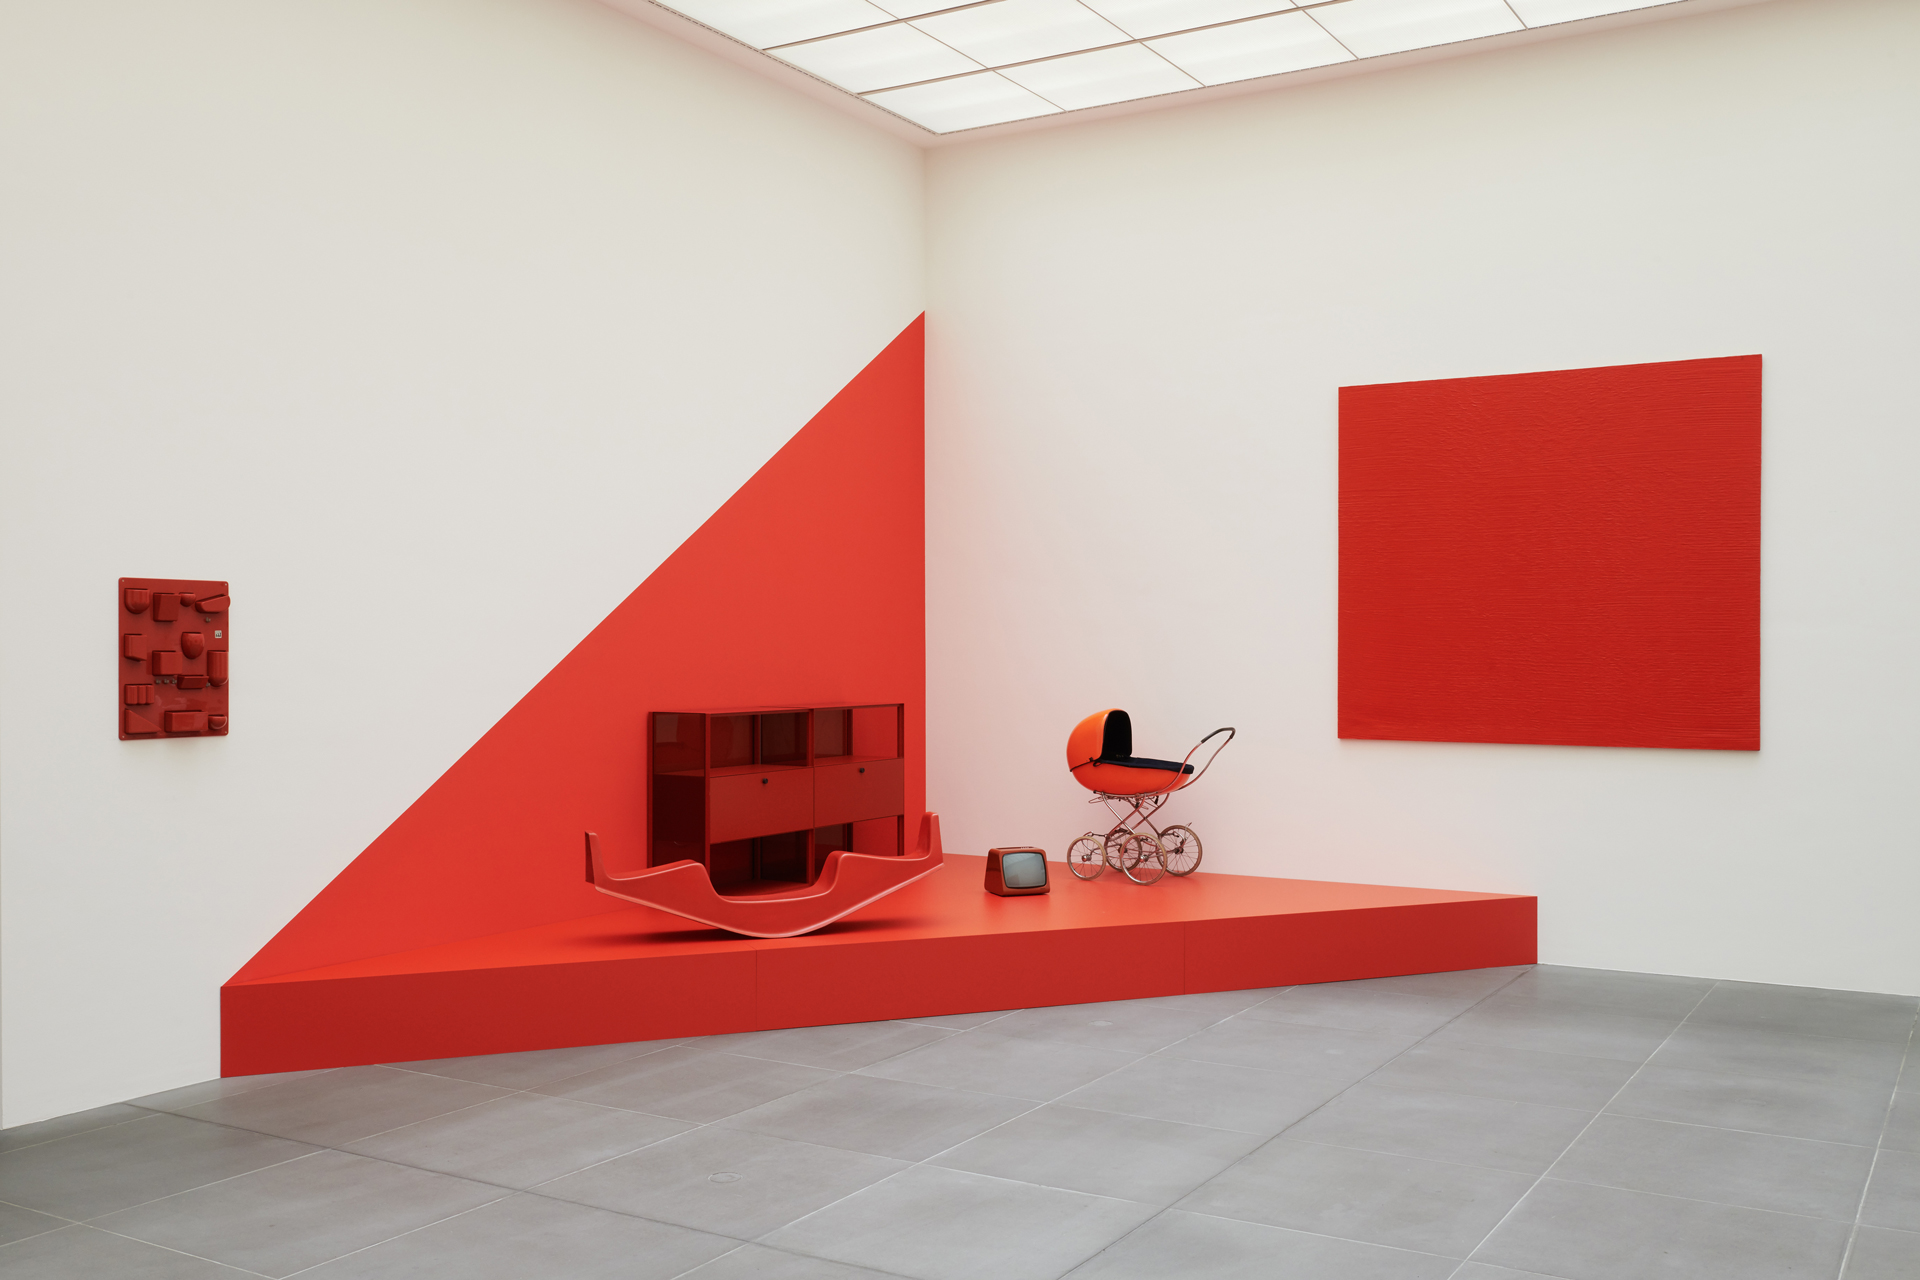 Exhibition view. Four objects in red colour (pram, television, rocker, shelf) can be seen on a red-painted pedestal with a triangular floor plan. On the walls (left of the pedestal) the red wall container ‘Utensilo’ and a painting in red colour (right).